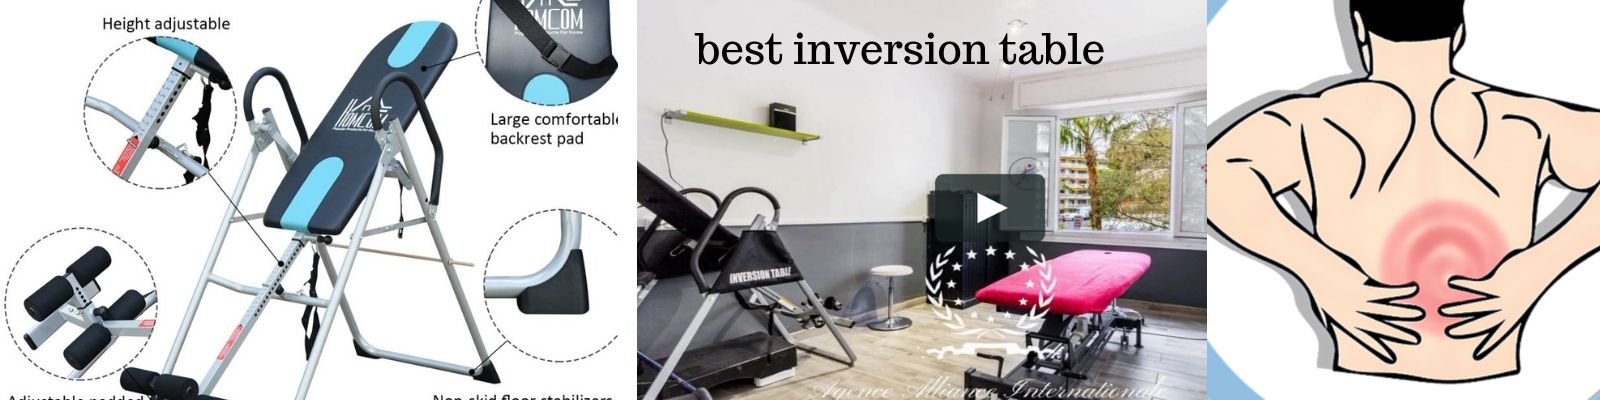 best inversion table 